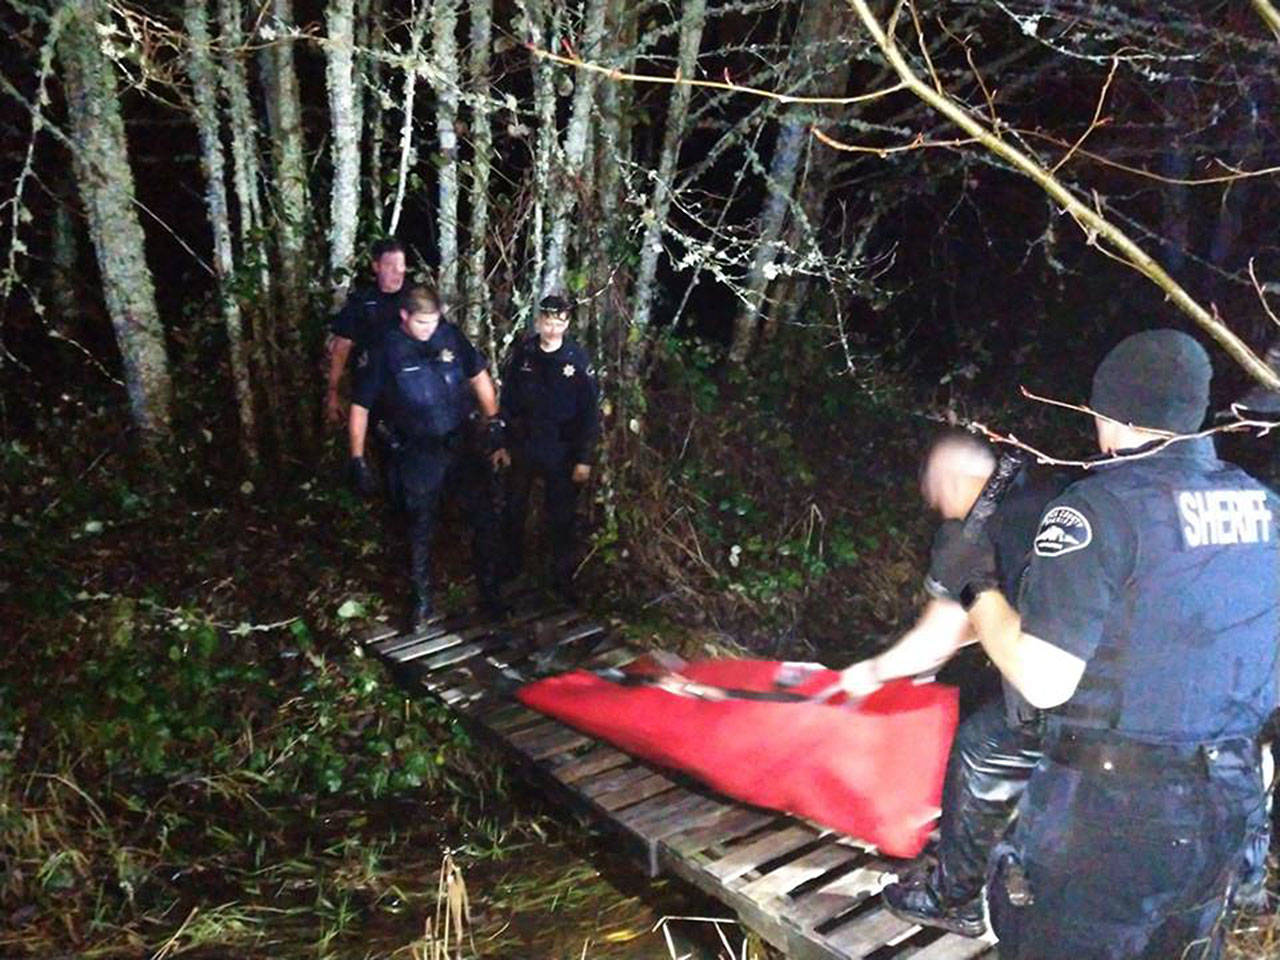 Deputies used a body bag to help carry the unresponsive suspect out of the swamp near Orting. They also had to use a ladder and some pallets to construct a rescue bridge over a creek and out of the swamp. Photo courtesy Pierce County Sheriff’s Department